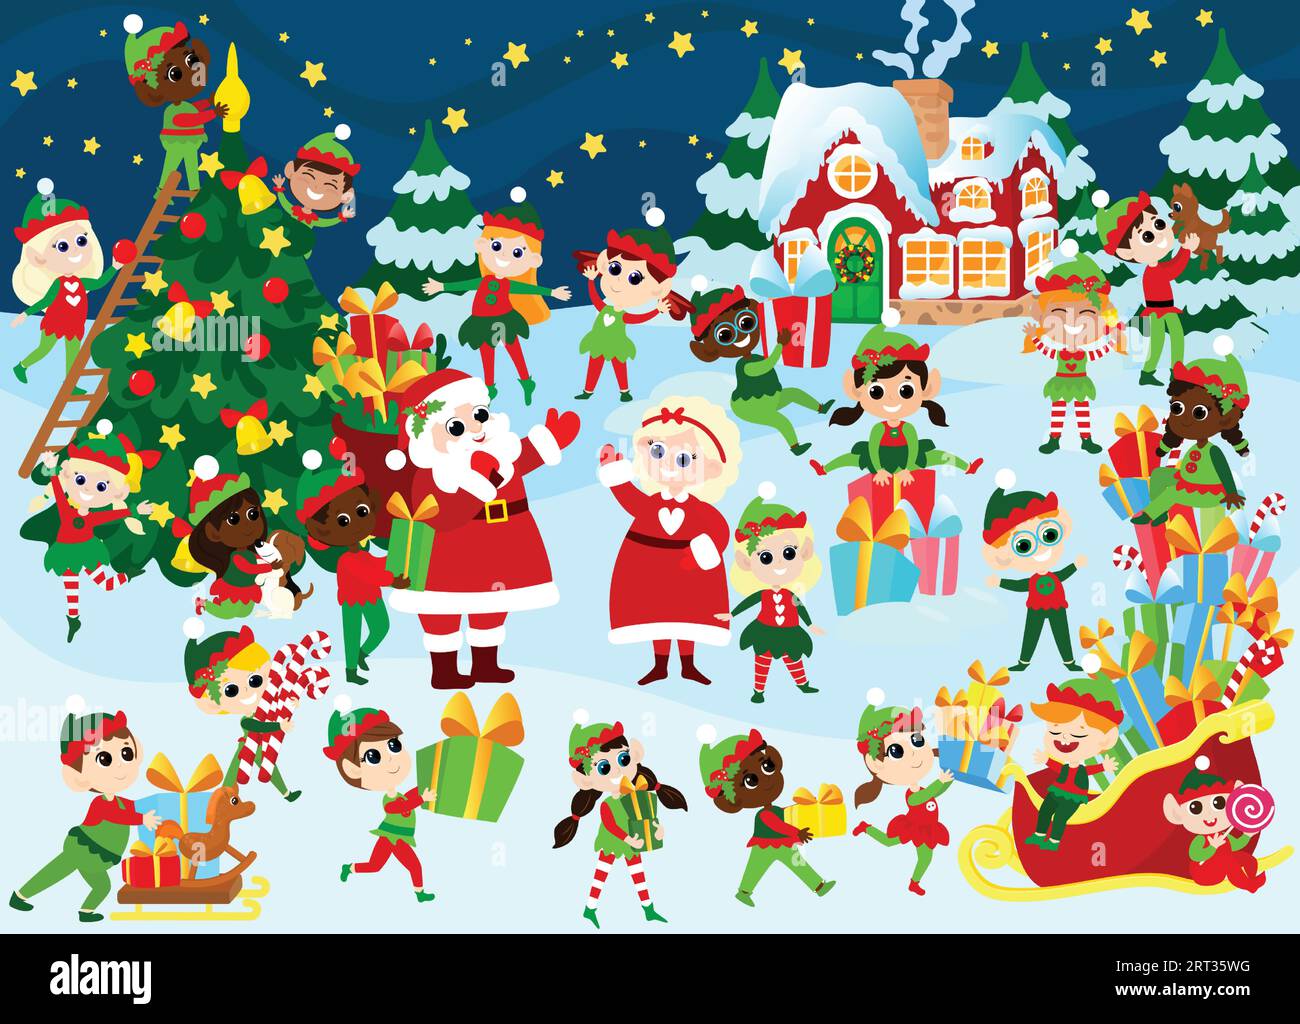 The night before Christmas in front of Santa Claus' house. Santa Claus and Mrs. Santa Claus stand in front of the house, and little elves. Stock Vector